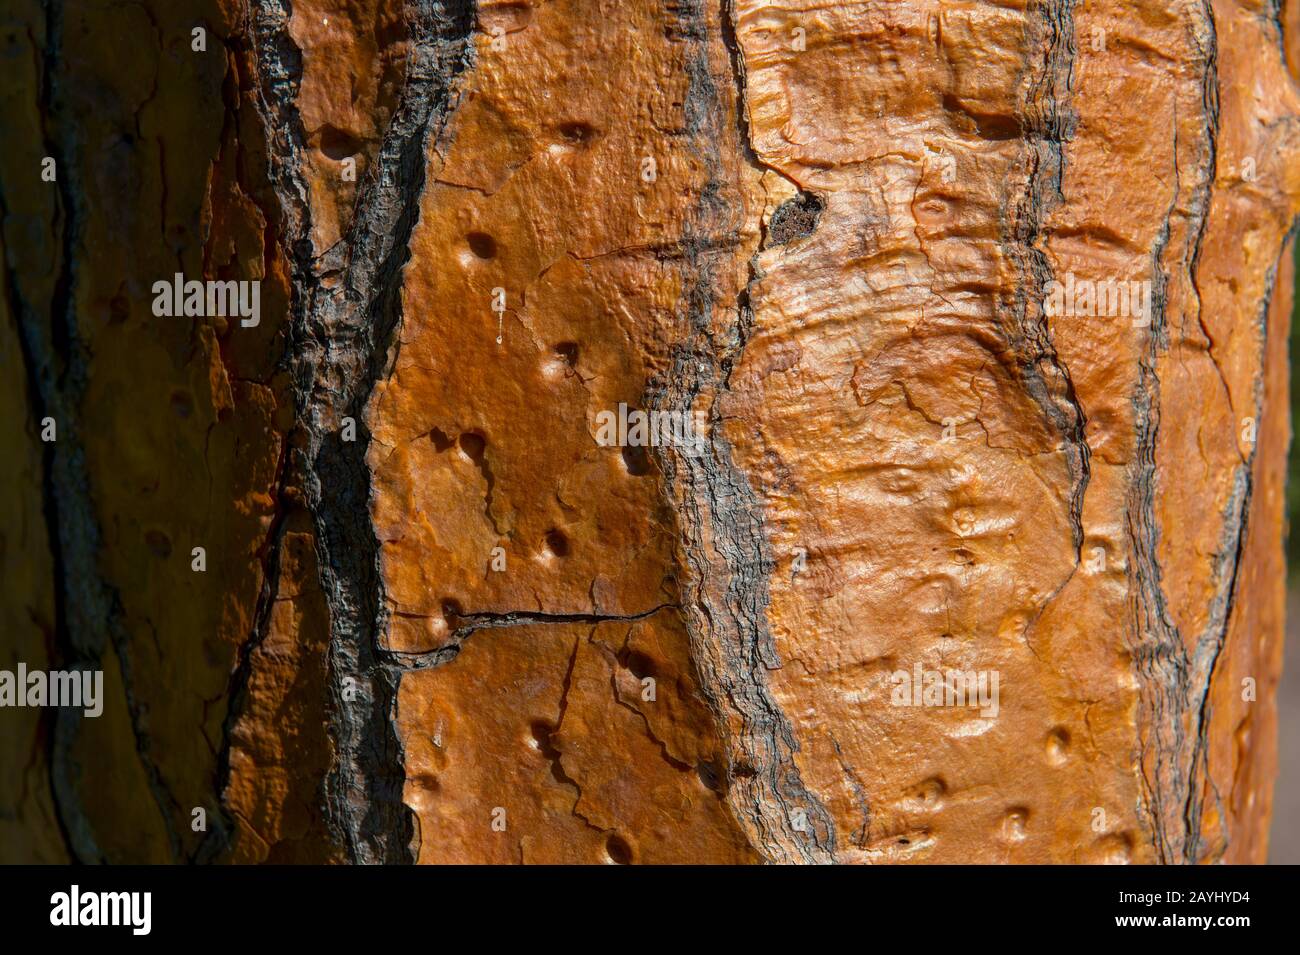 Close-up of the bark of a Opuntia cacti at the Charles Darwin Research Station in Puerto Ayora on Santa Cruz Island (Indefatigable) in the Galapagos I Stock Photo